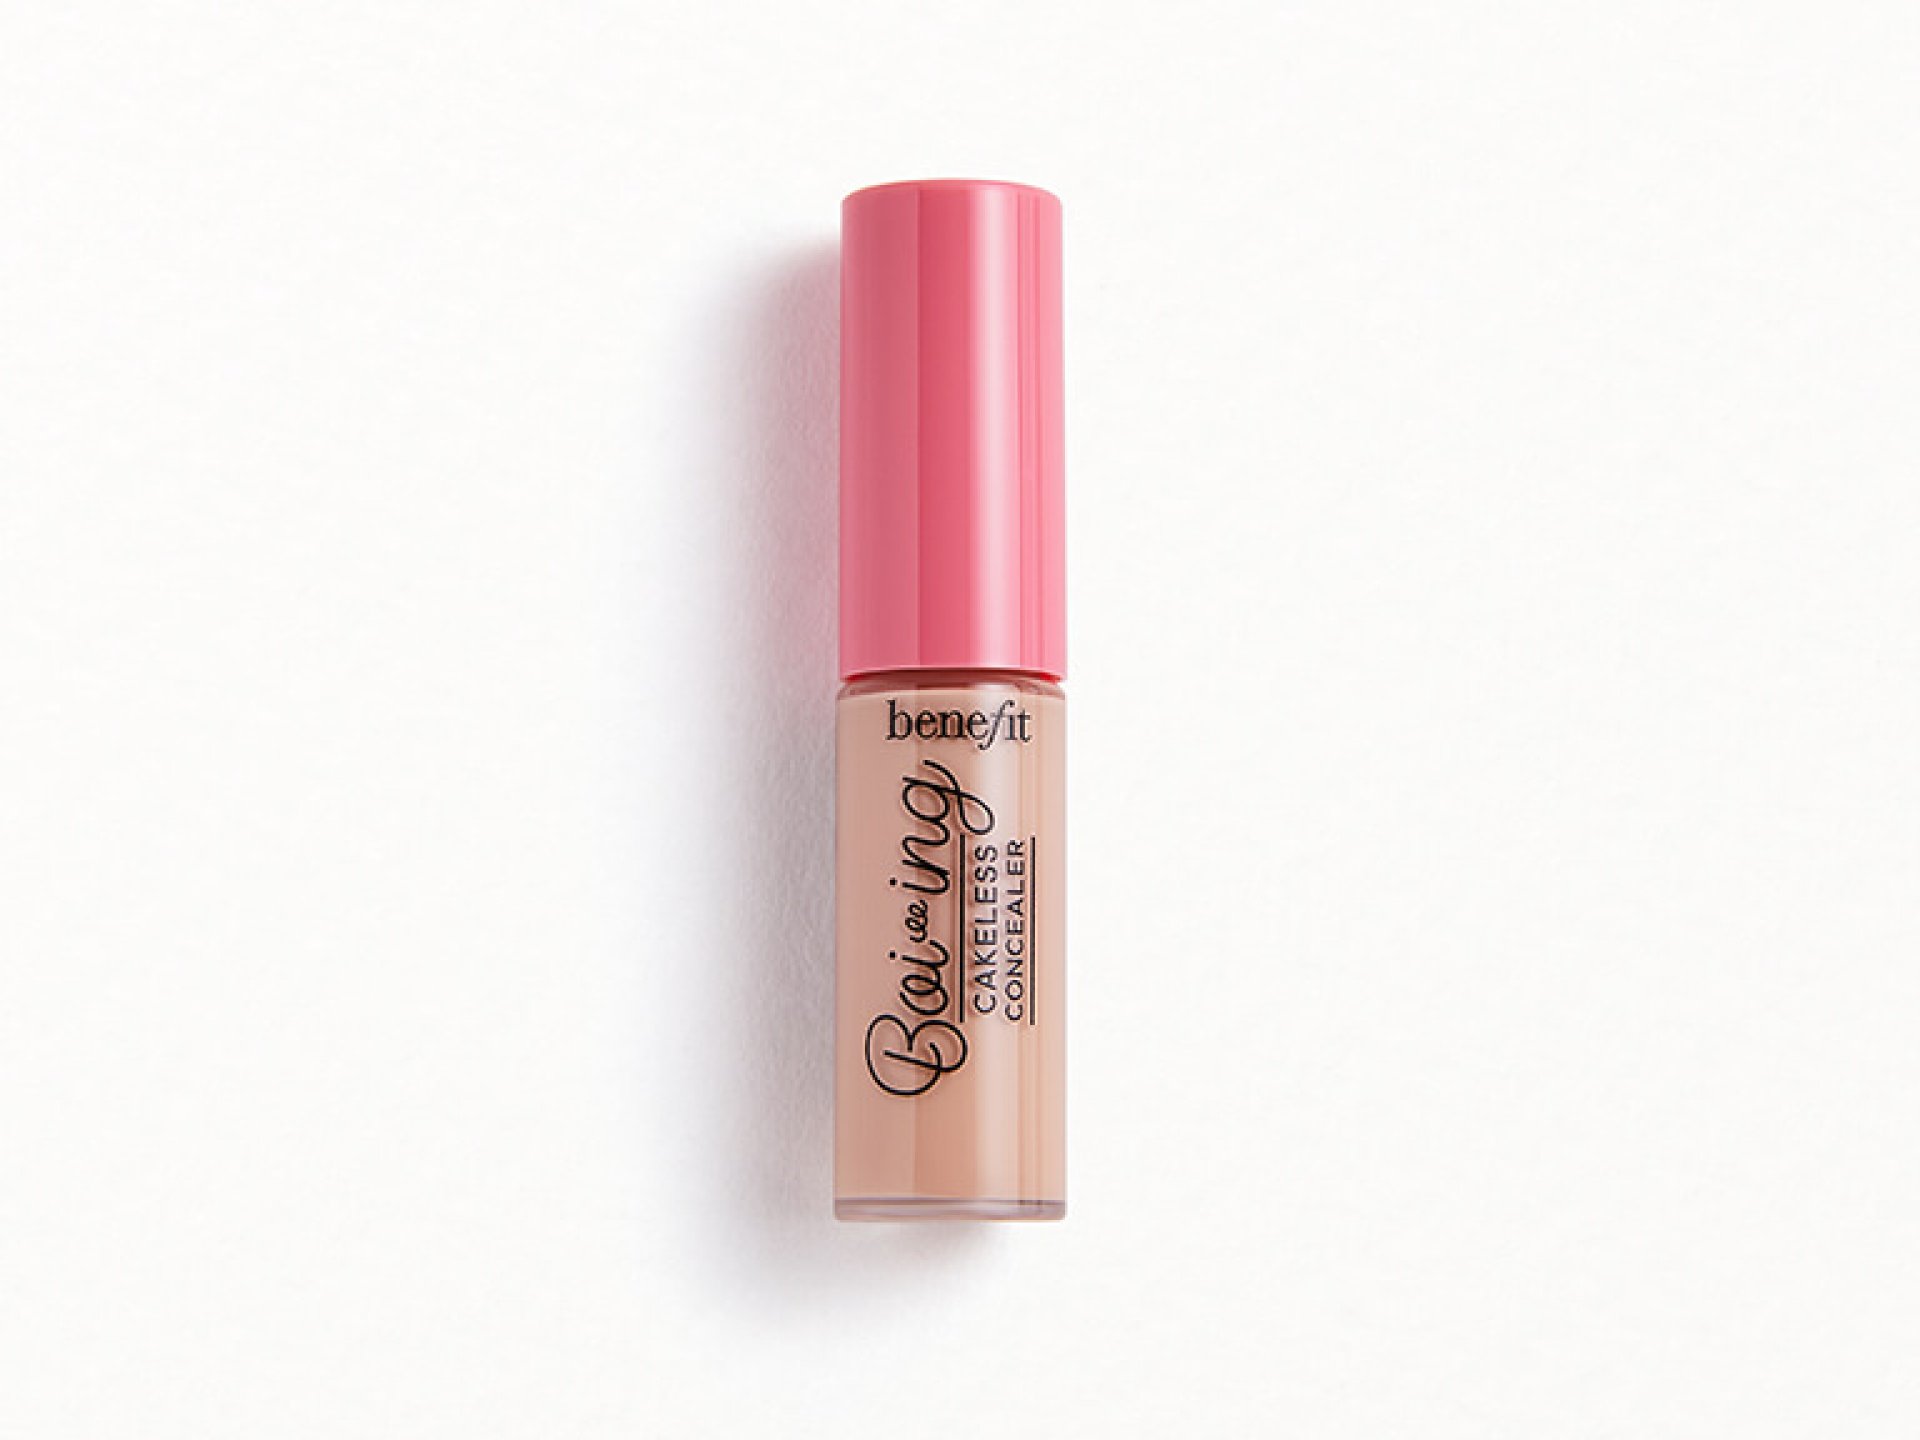 BENEFIT COSMETICS Boi-ing Cakeless Concealer in 4 Can t Stop - Light Cool